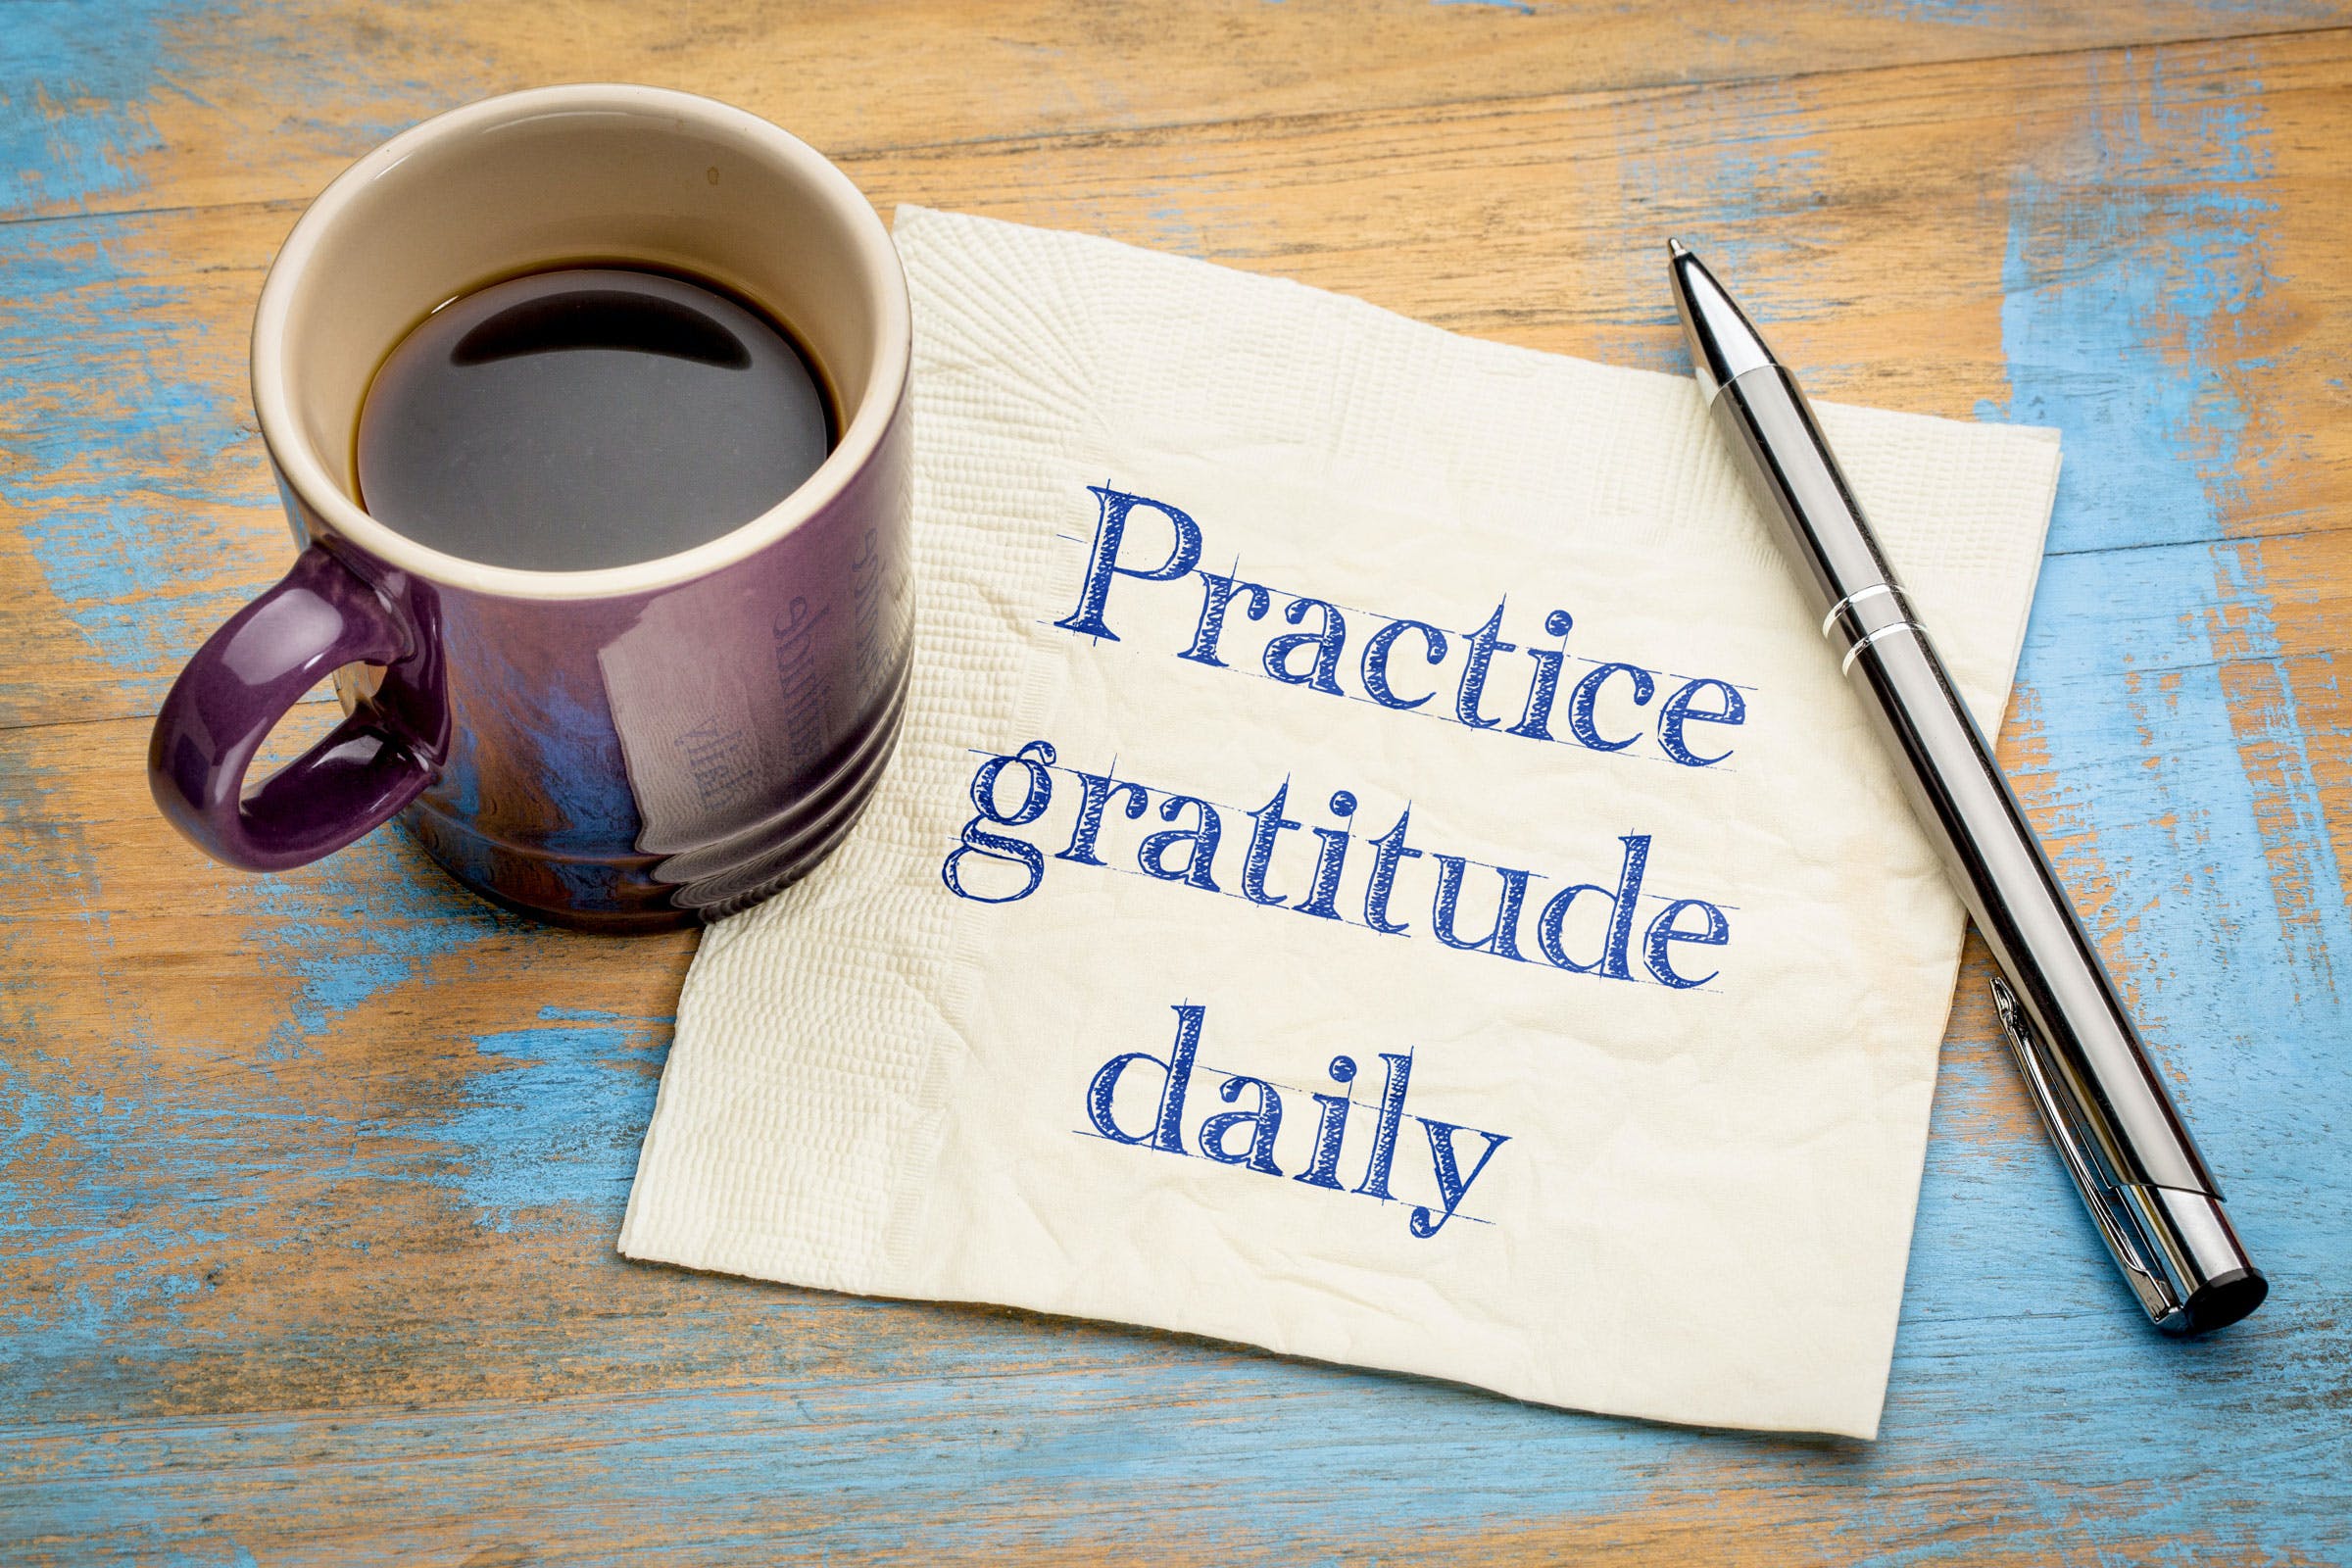 One of the simplest ways to improve happiness and satisfaction with life is by cultivating an attitude of gratitude. The benefits are endless.